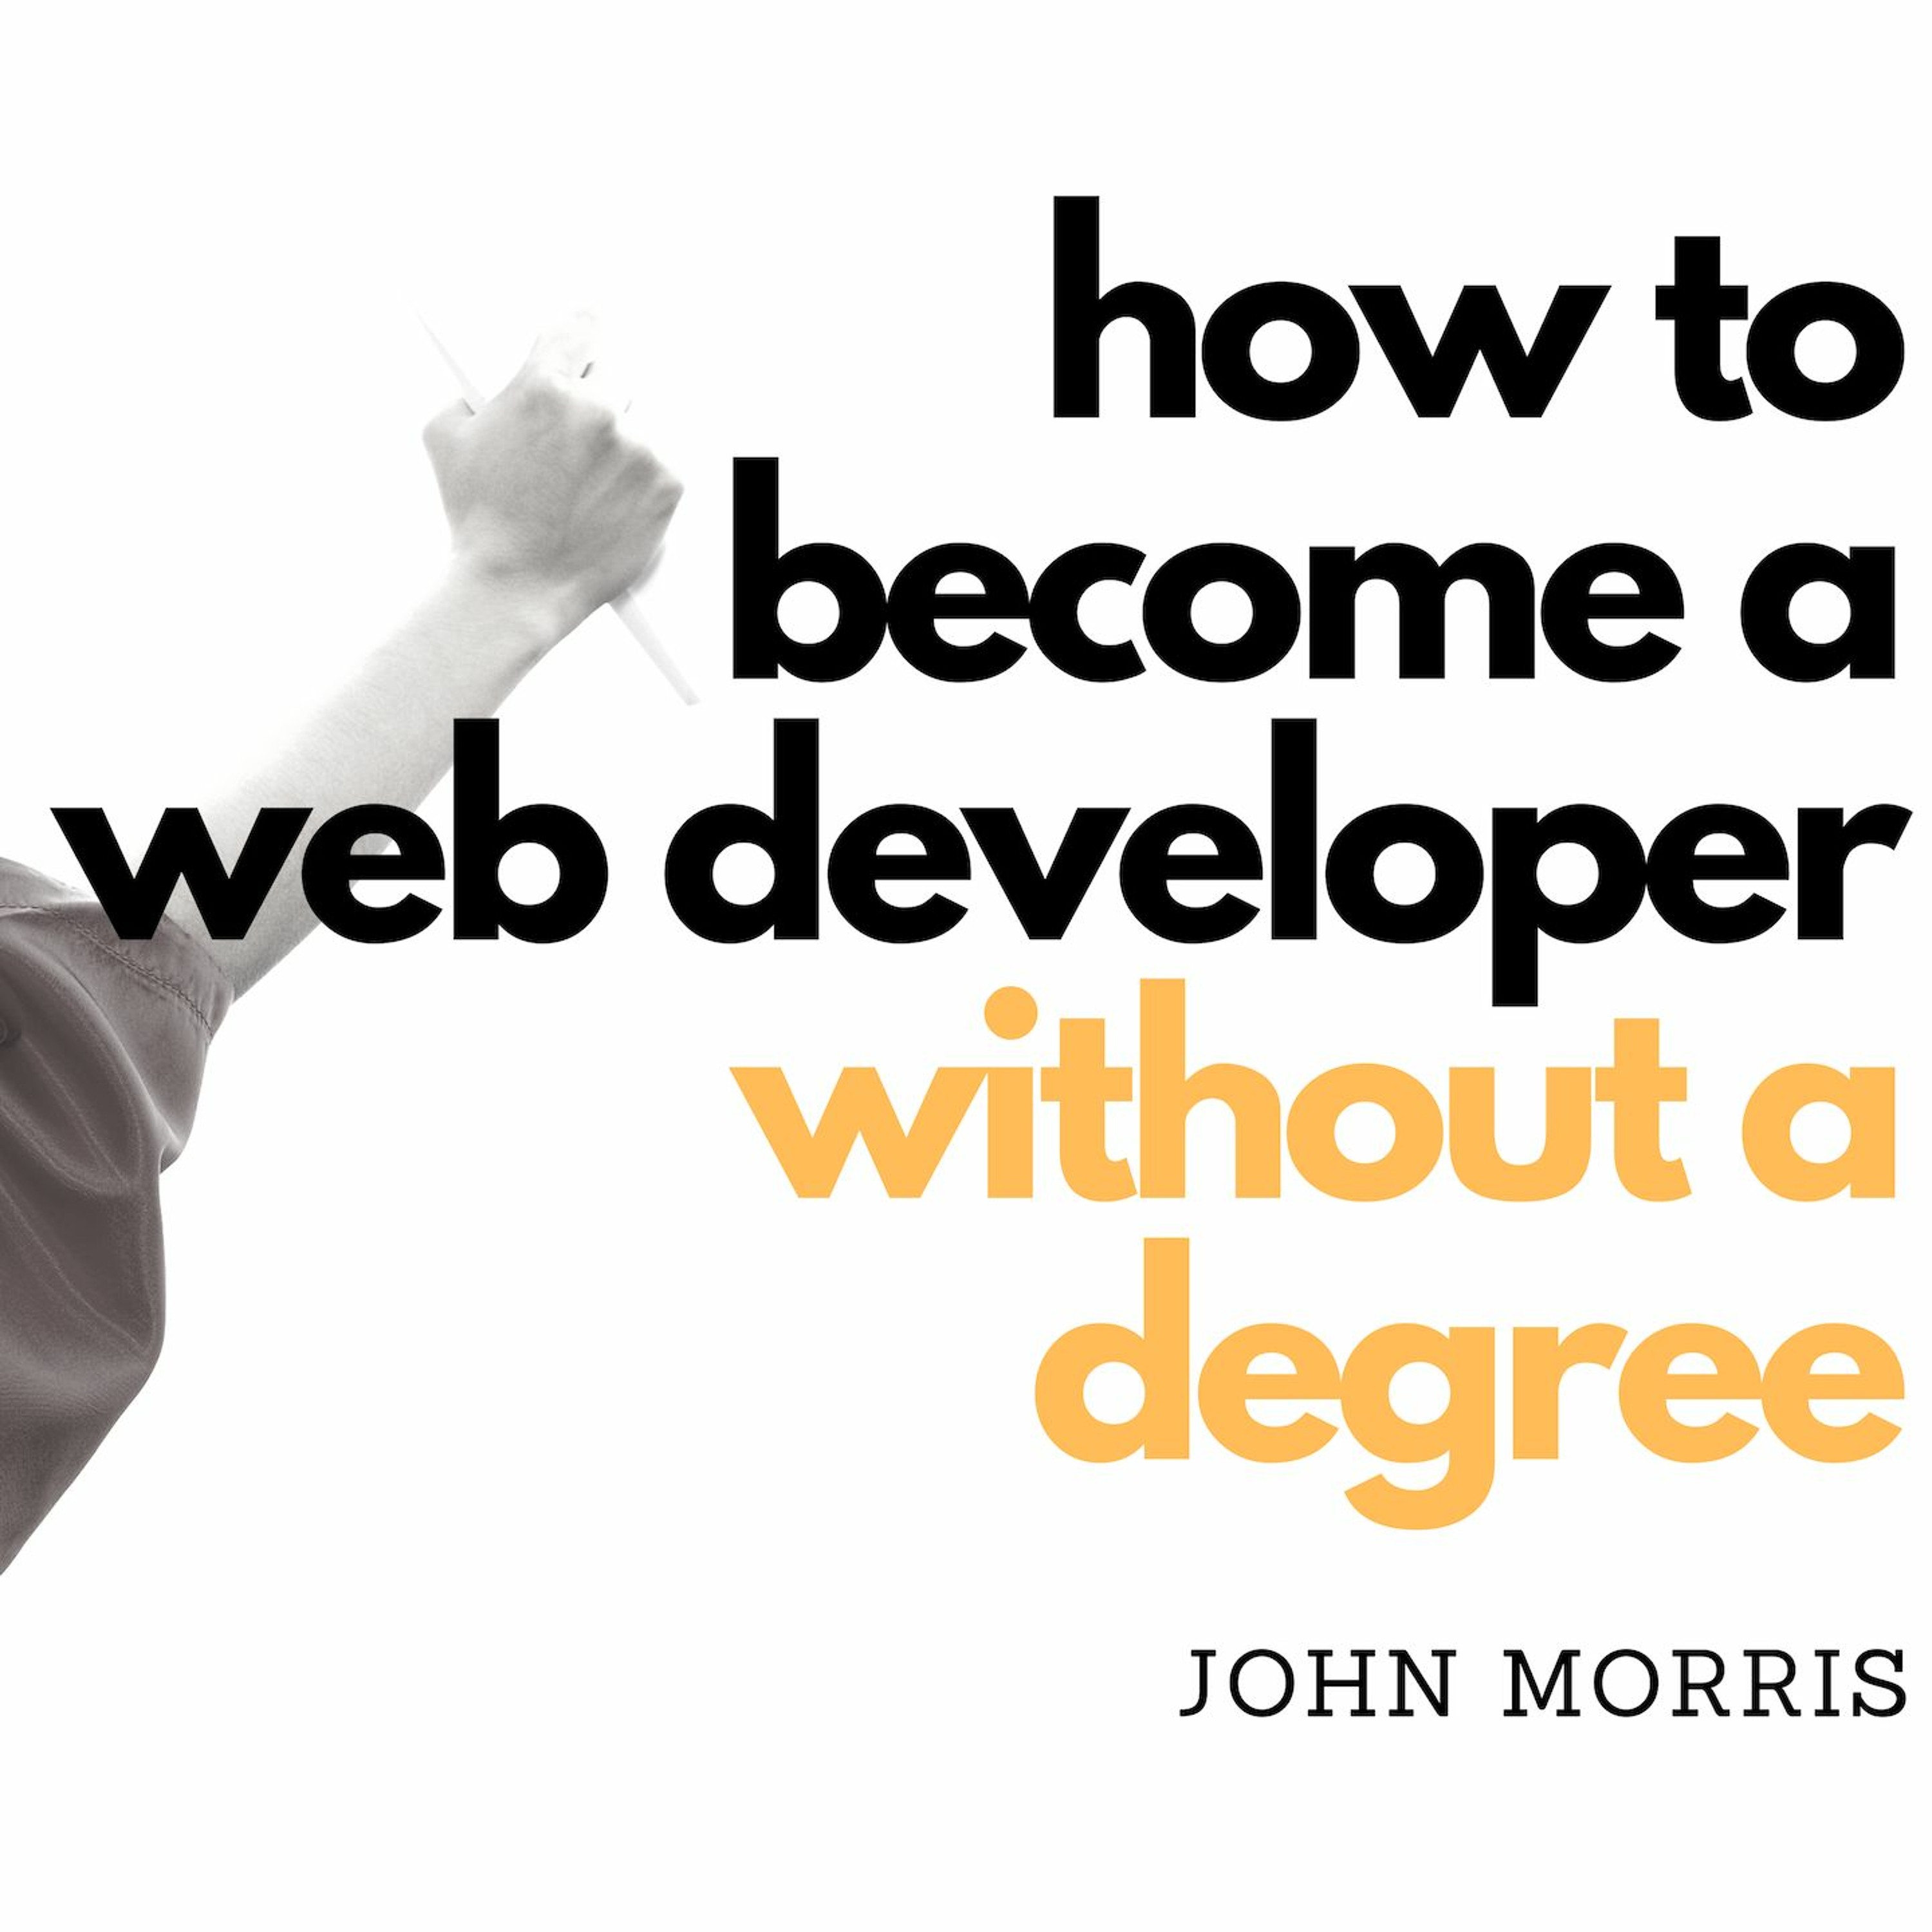 How to become a web developer without a degree